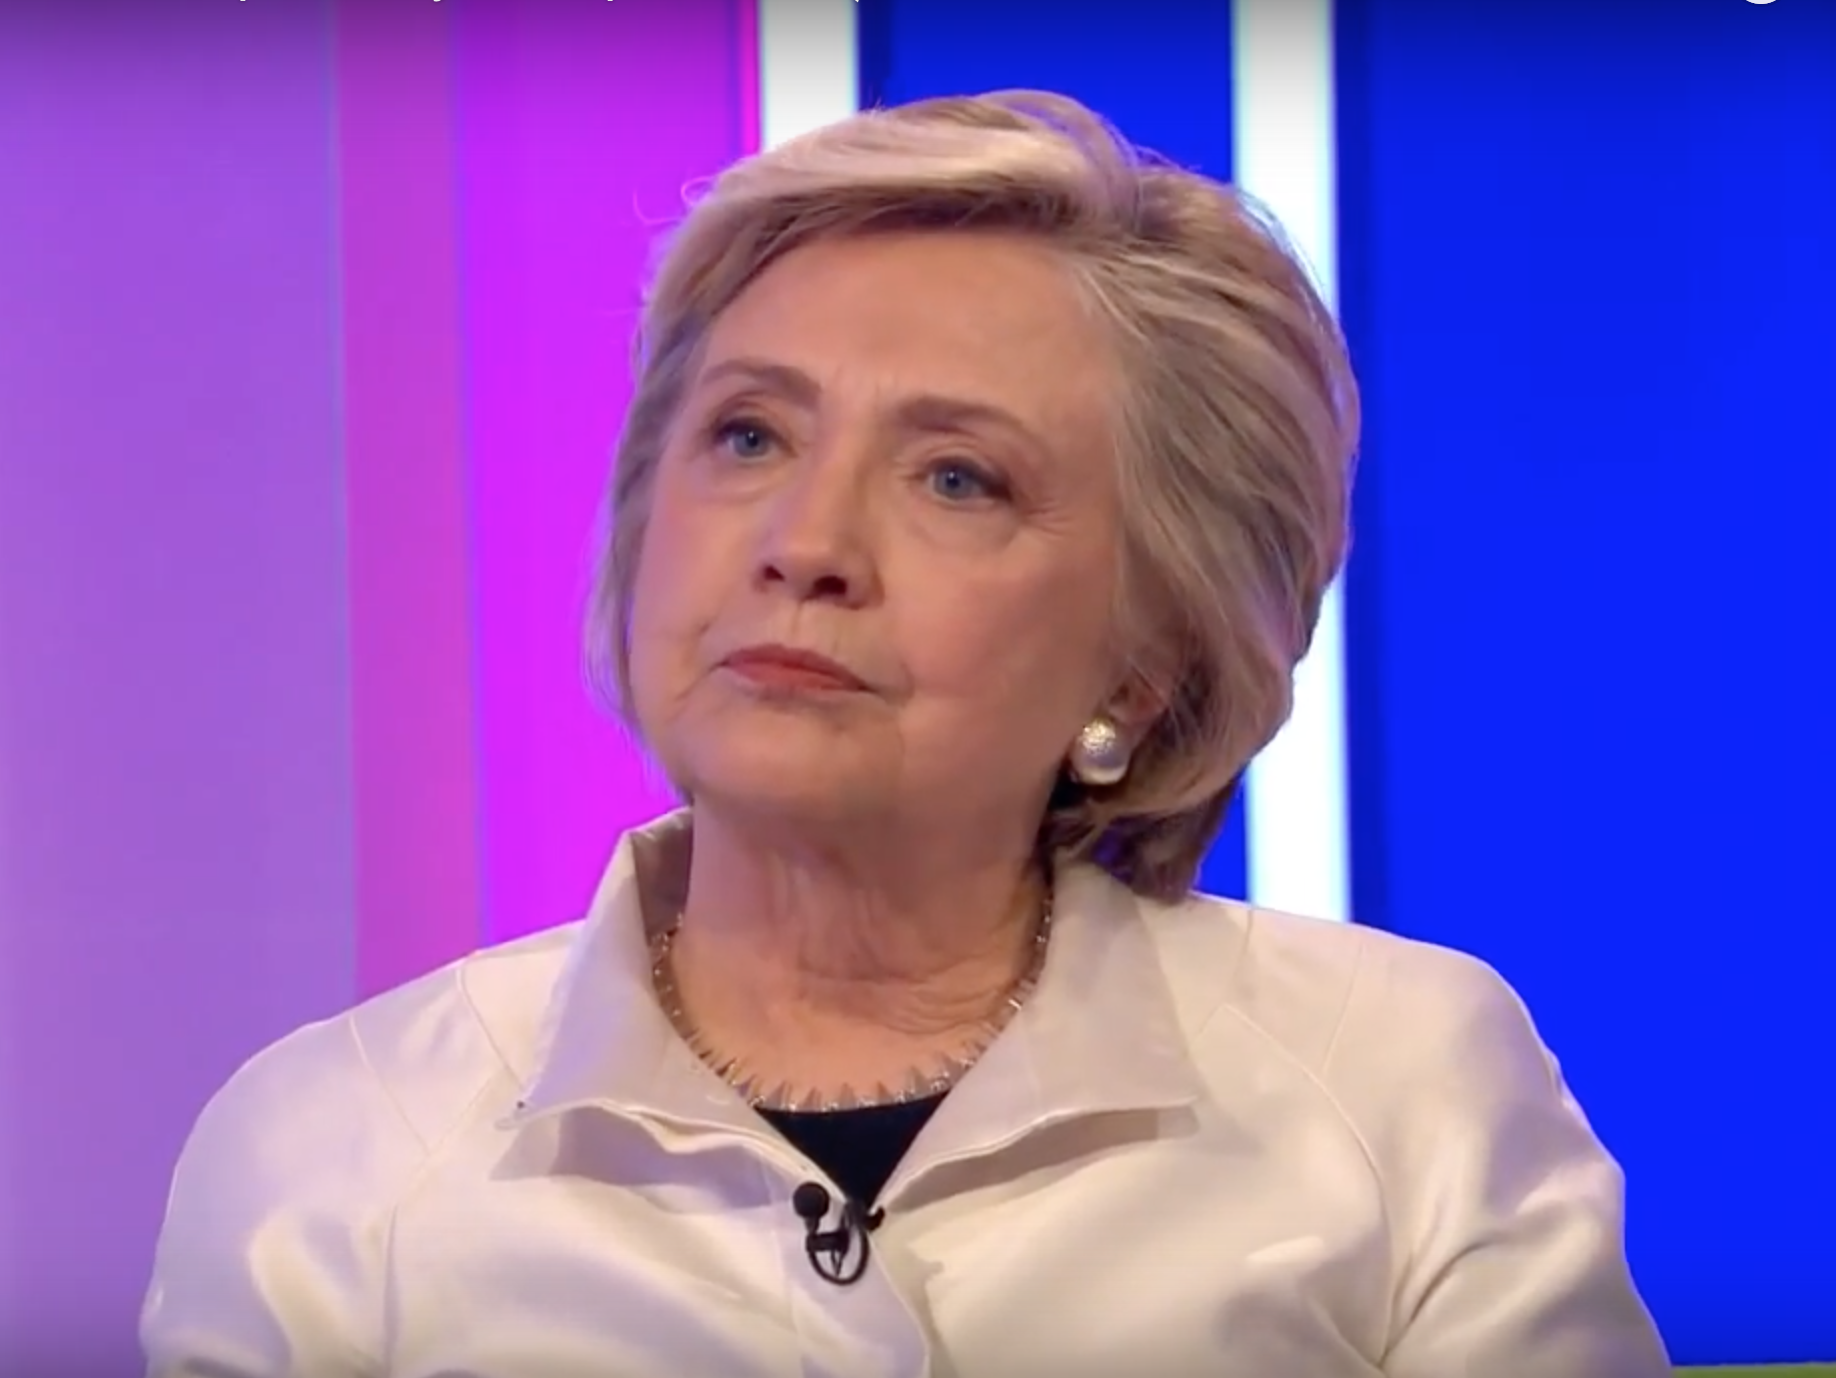 Hillary Clinton speaks out about the election on BBC's The One Show